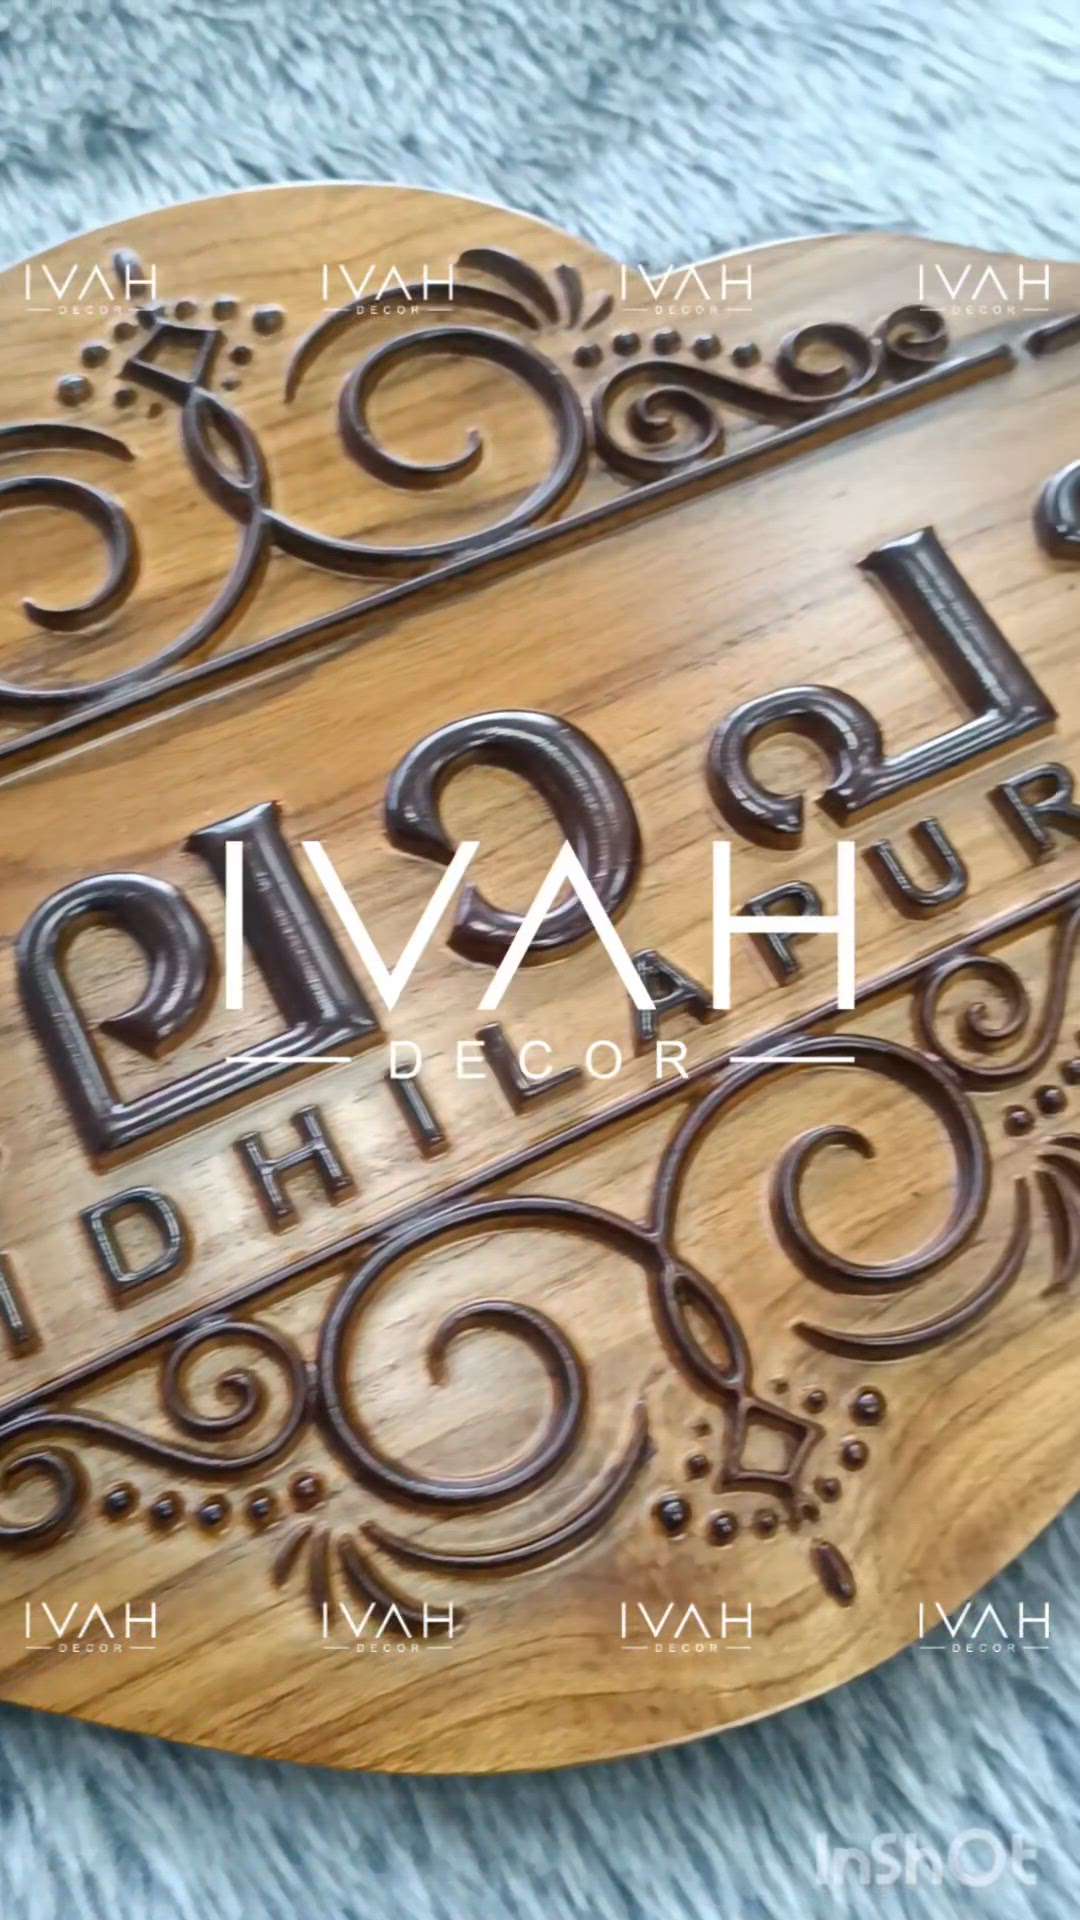 Wood Carving House Name plate.